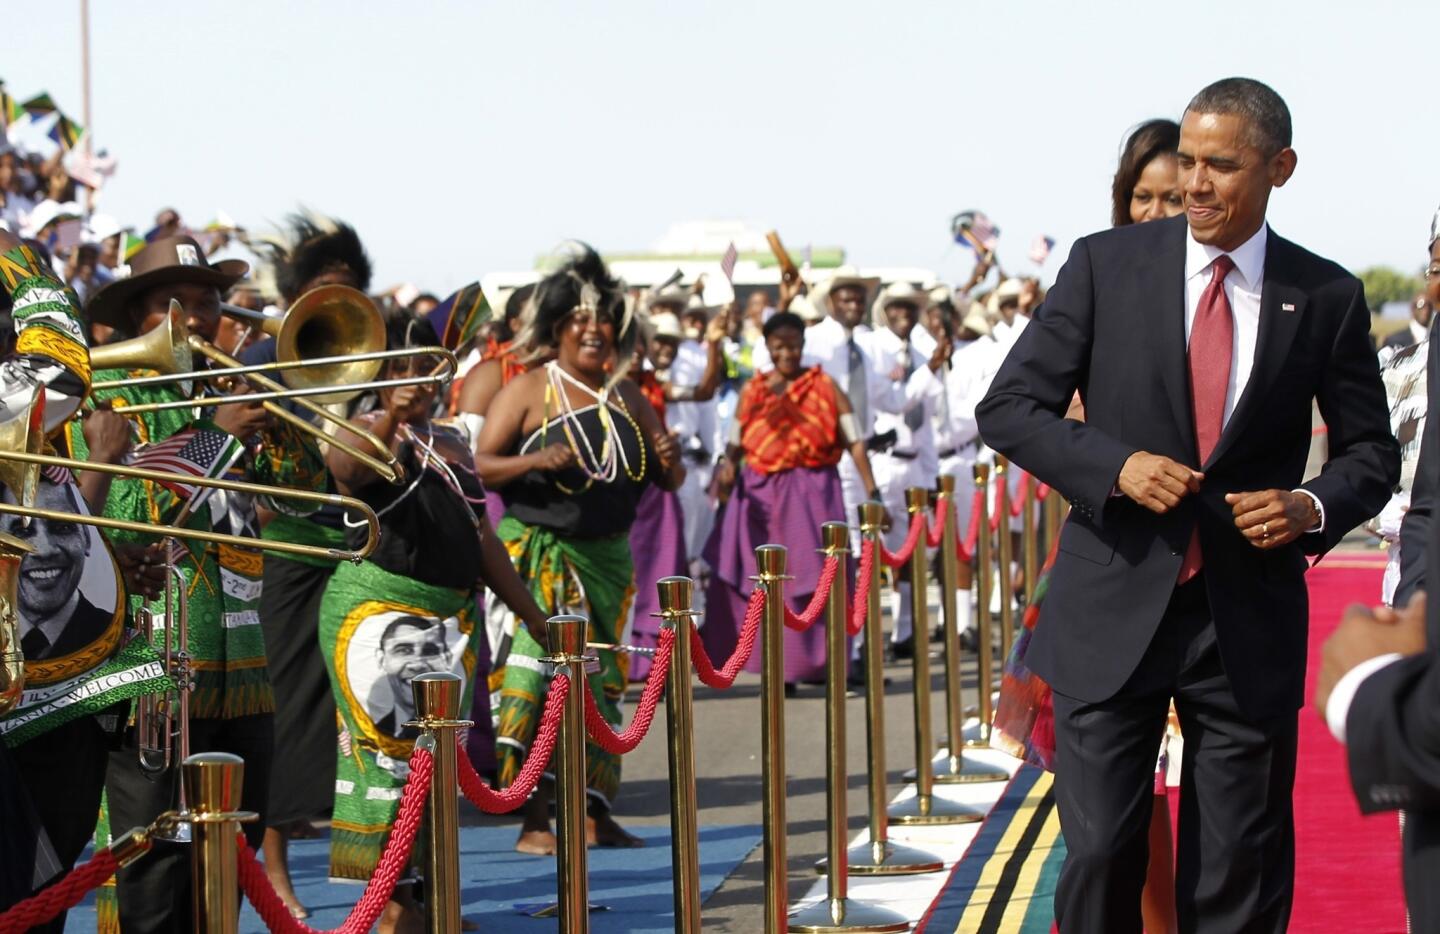 U.S. President Obama dances as a Tanzanian band plays during an official arrival ceremony at Julius Nyerere Airport in Dar es Salaam